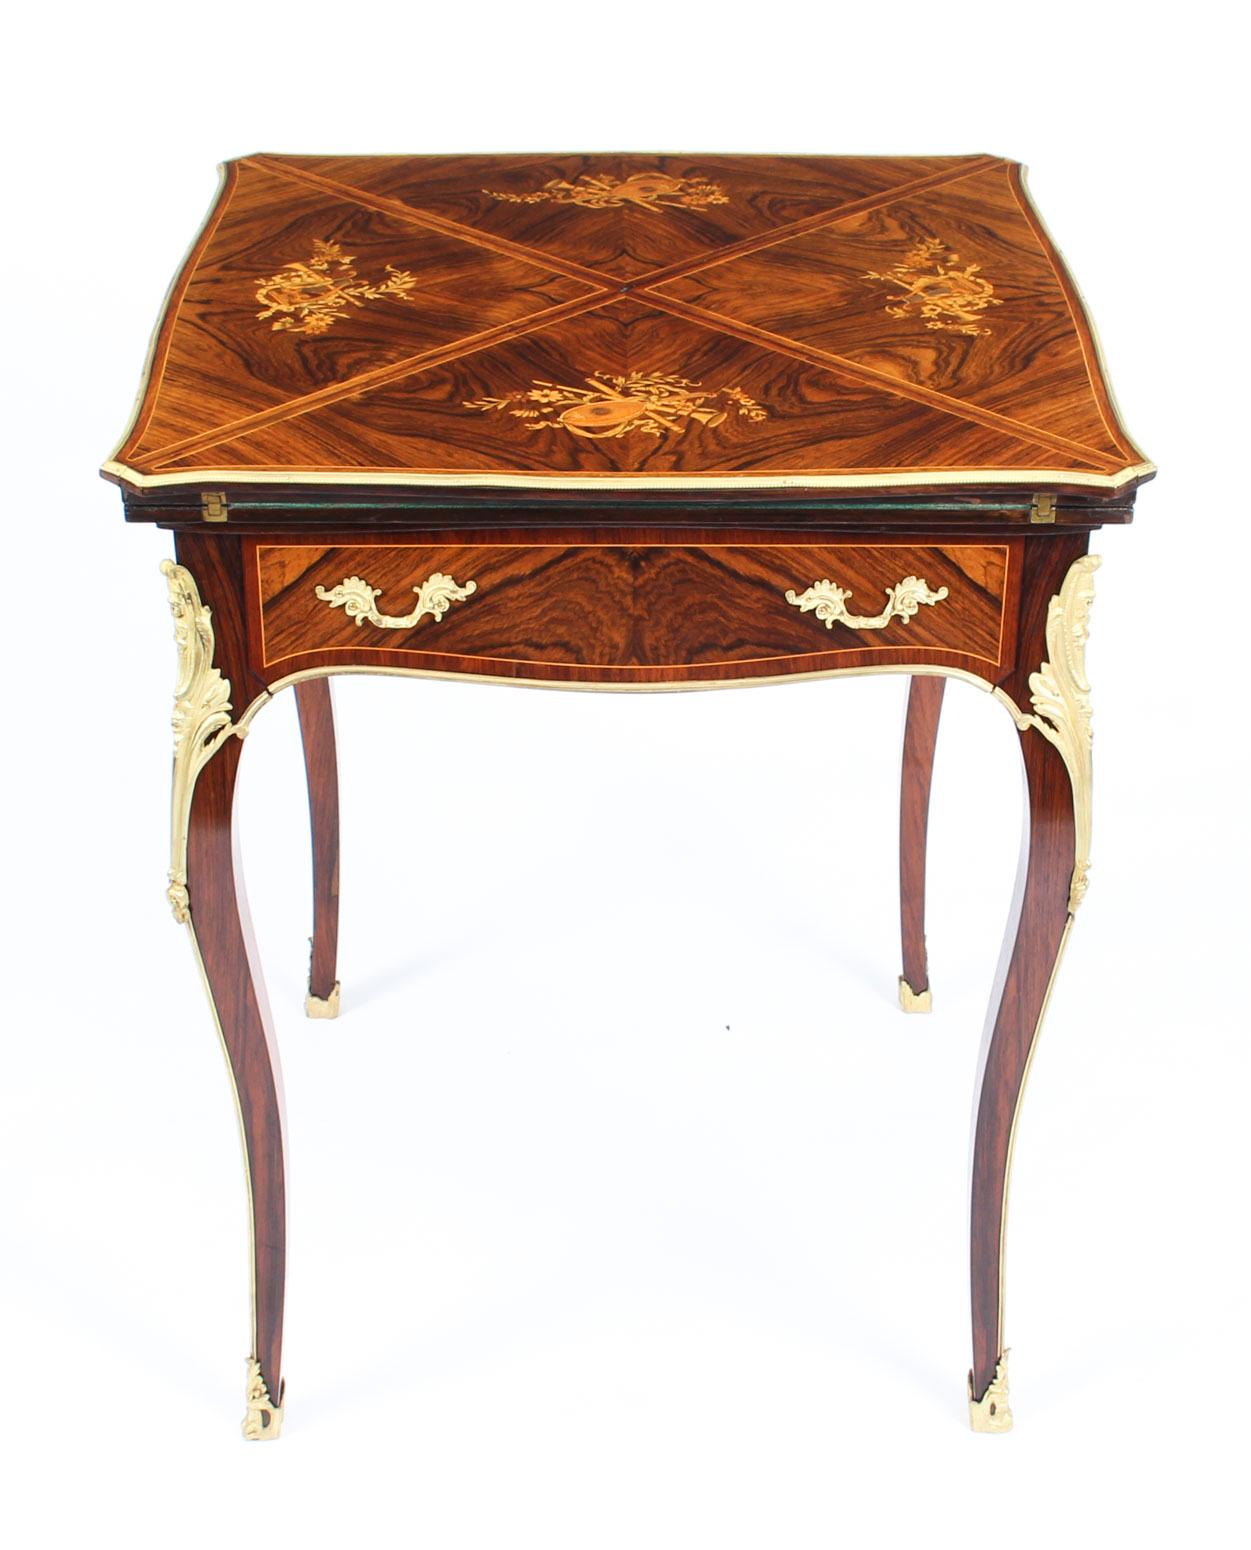 This is a wonderful antique Victorian ormolu-mounted envelope card table, circa 1880 in date.

The card table is made from superb quality Gonçalo Alves, has the most striking musical instrument marquetry decoration on each leaf and superb gilded